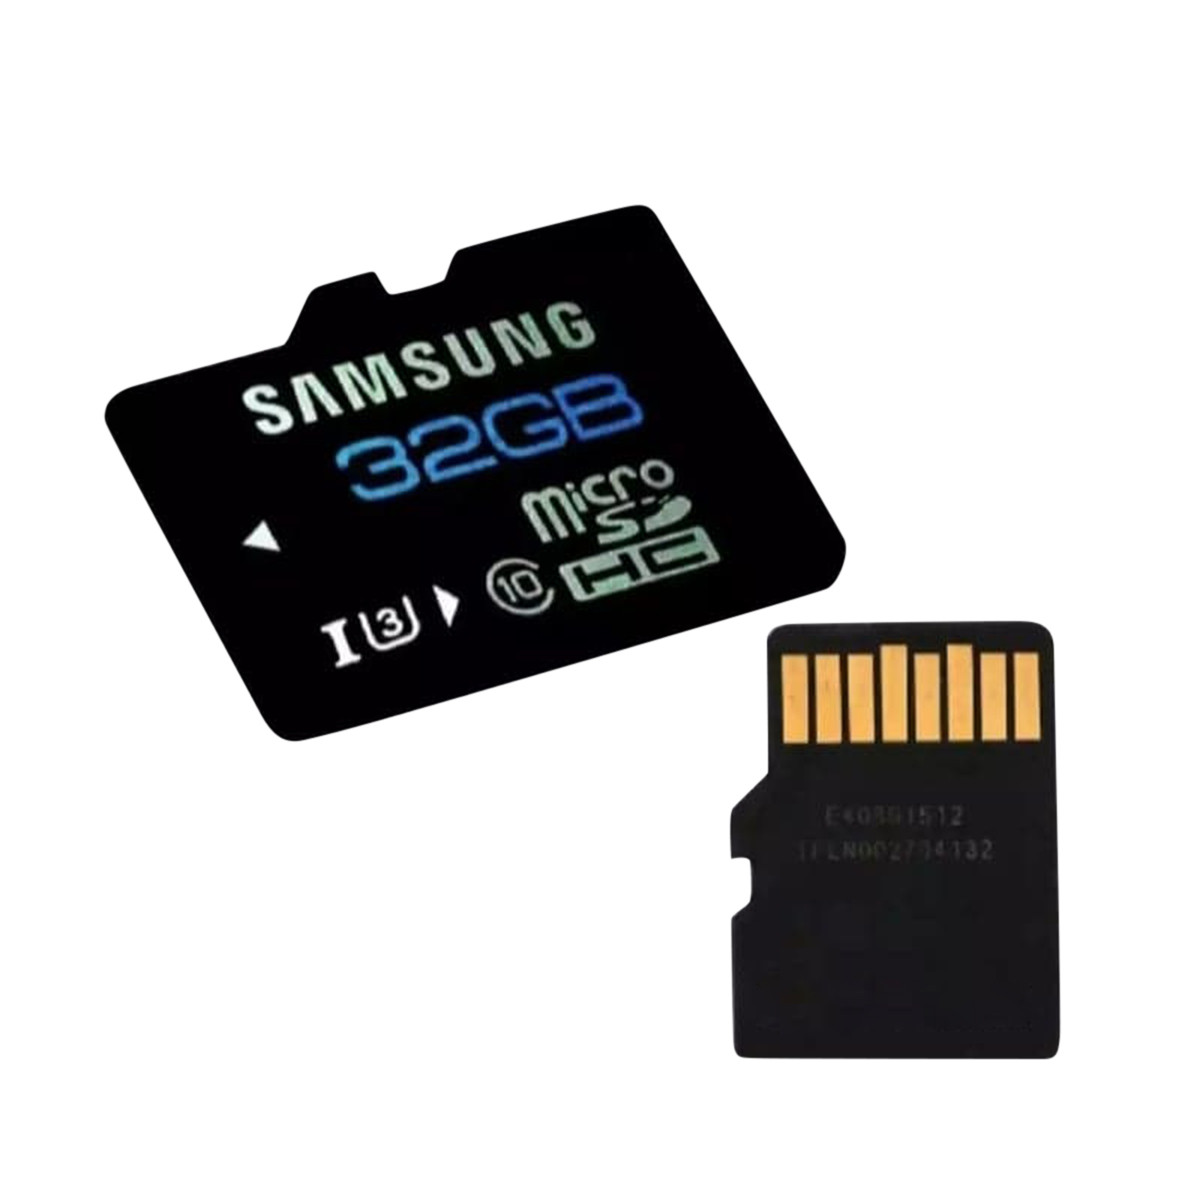 Samsung 32 GB Memory Card Class 10 for all storage device Water-resistant - 6 Months Replacement Warranty